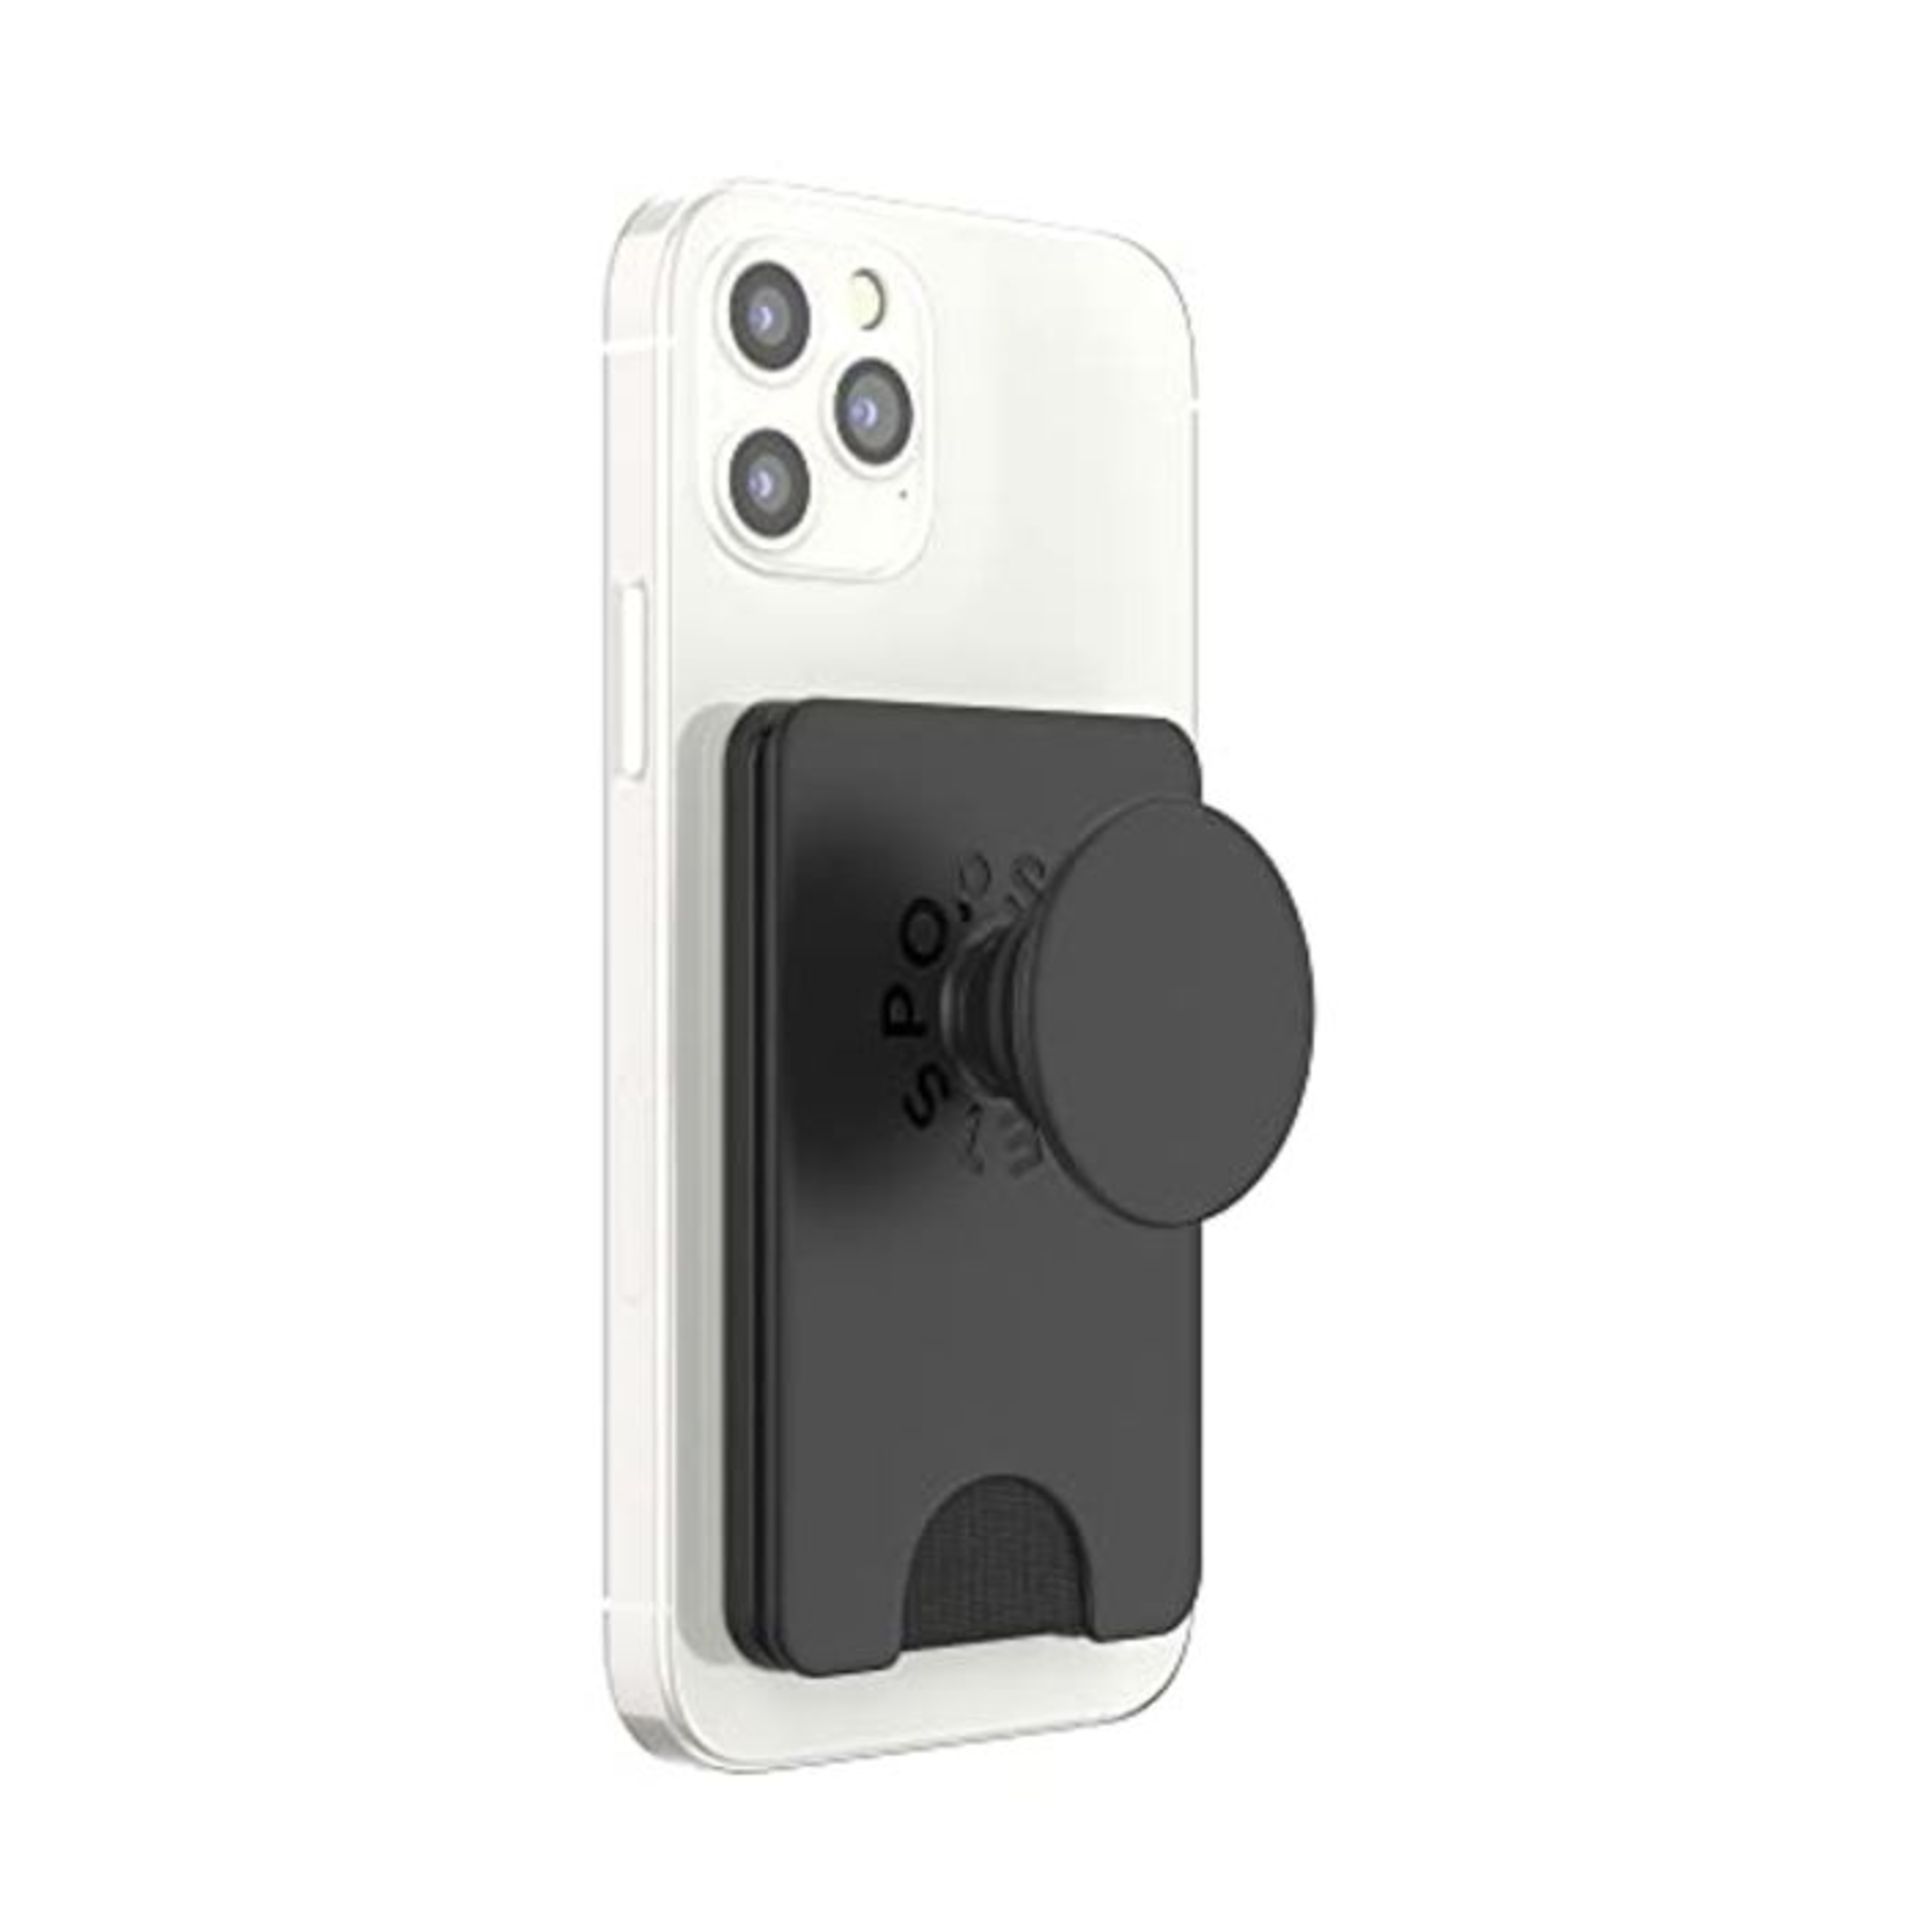 PopSockets: PopWallet+ for MagSafe - Card holder with an Integrated Swappable PopTop f